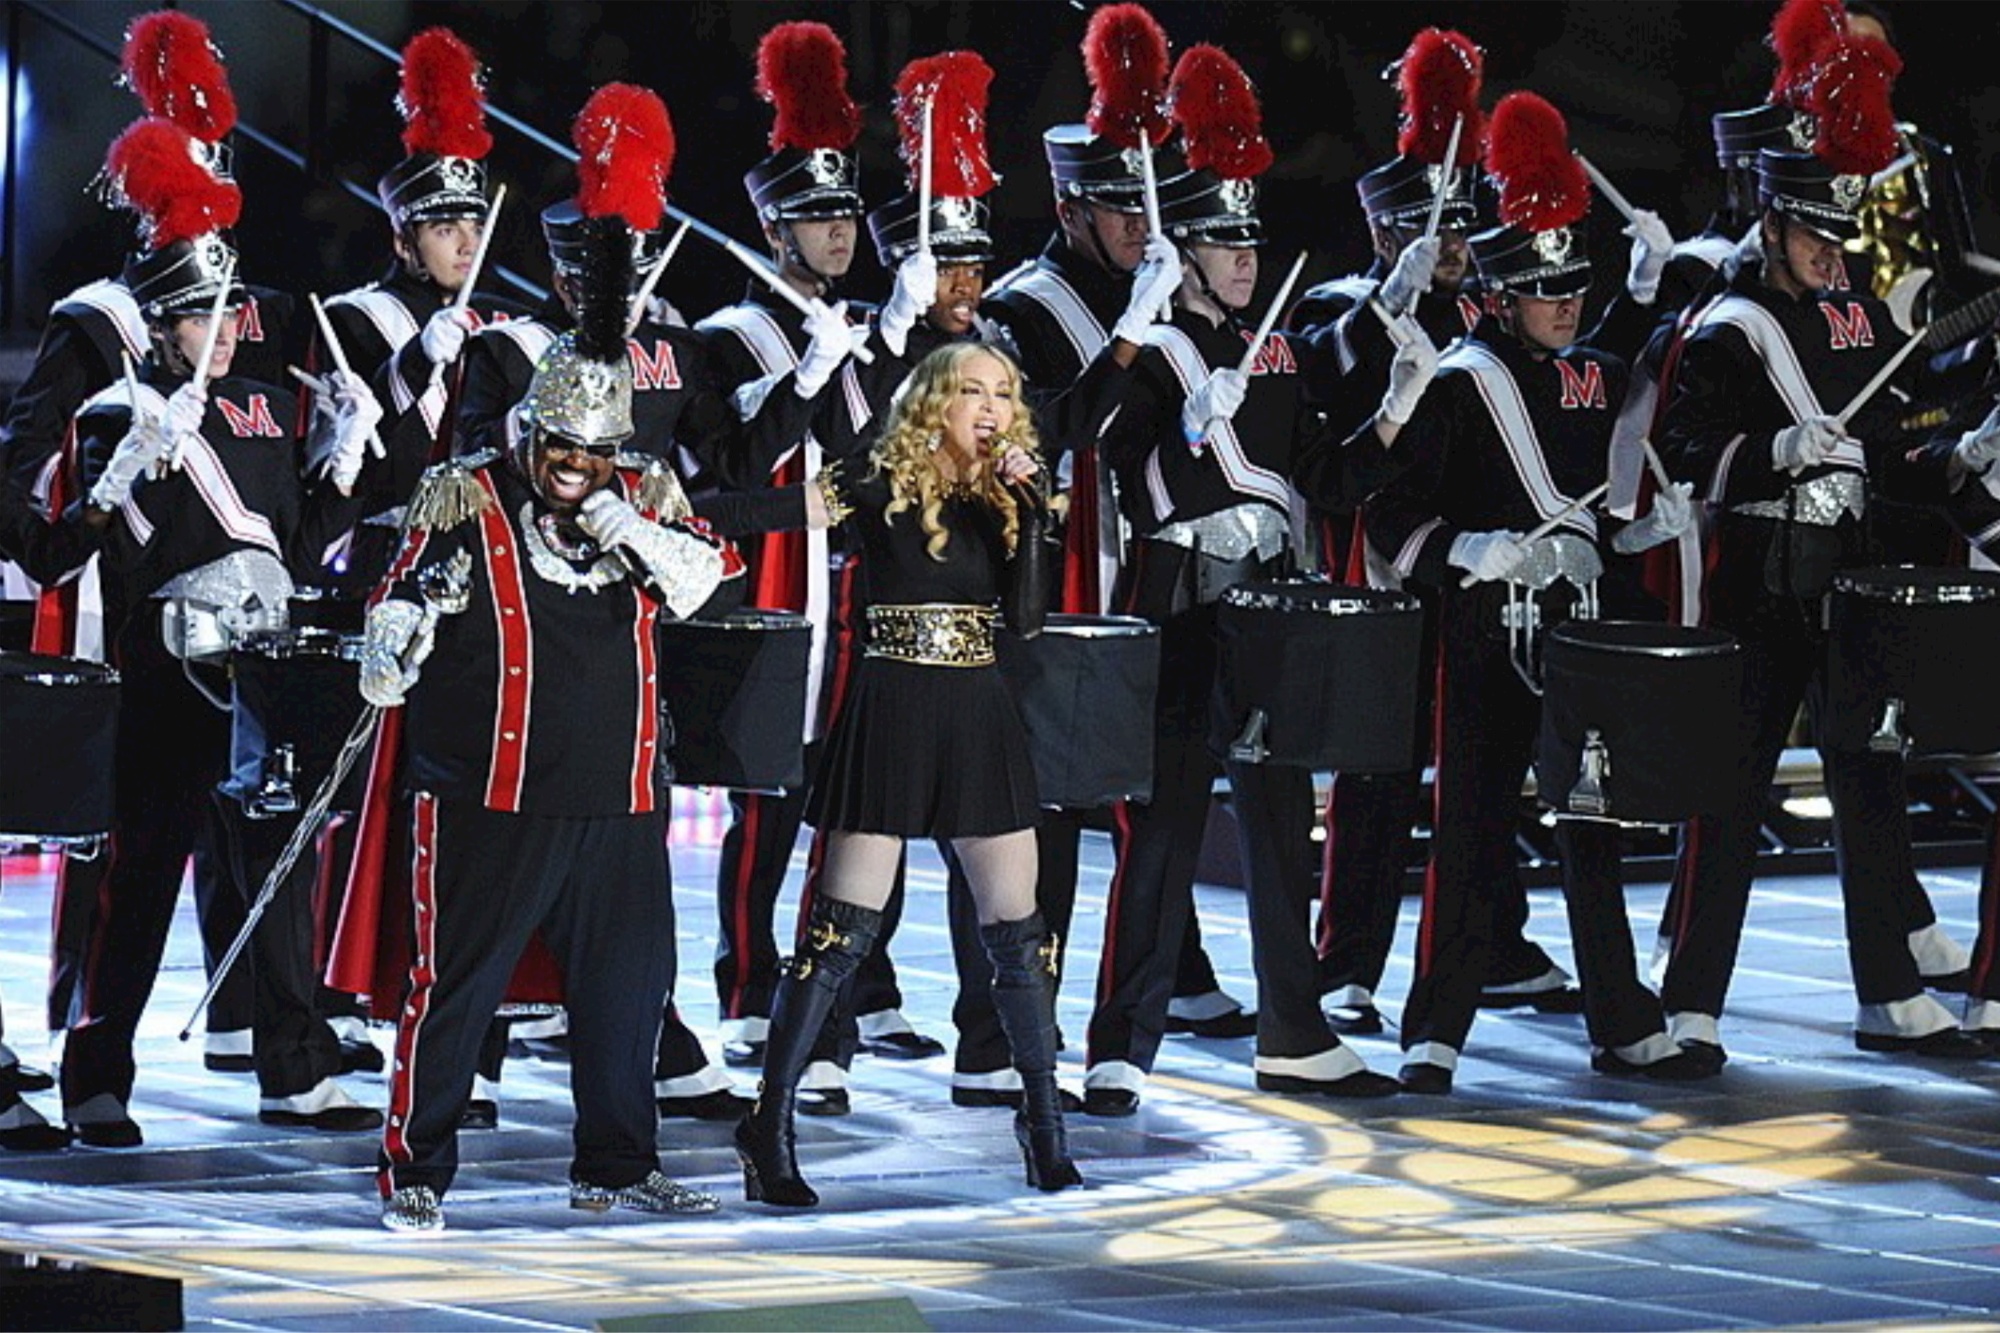 Madonna stands in front of a band and conducts.